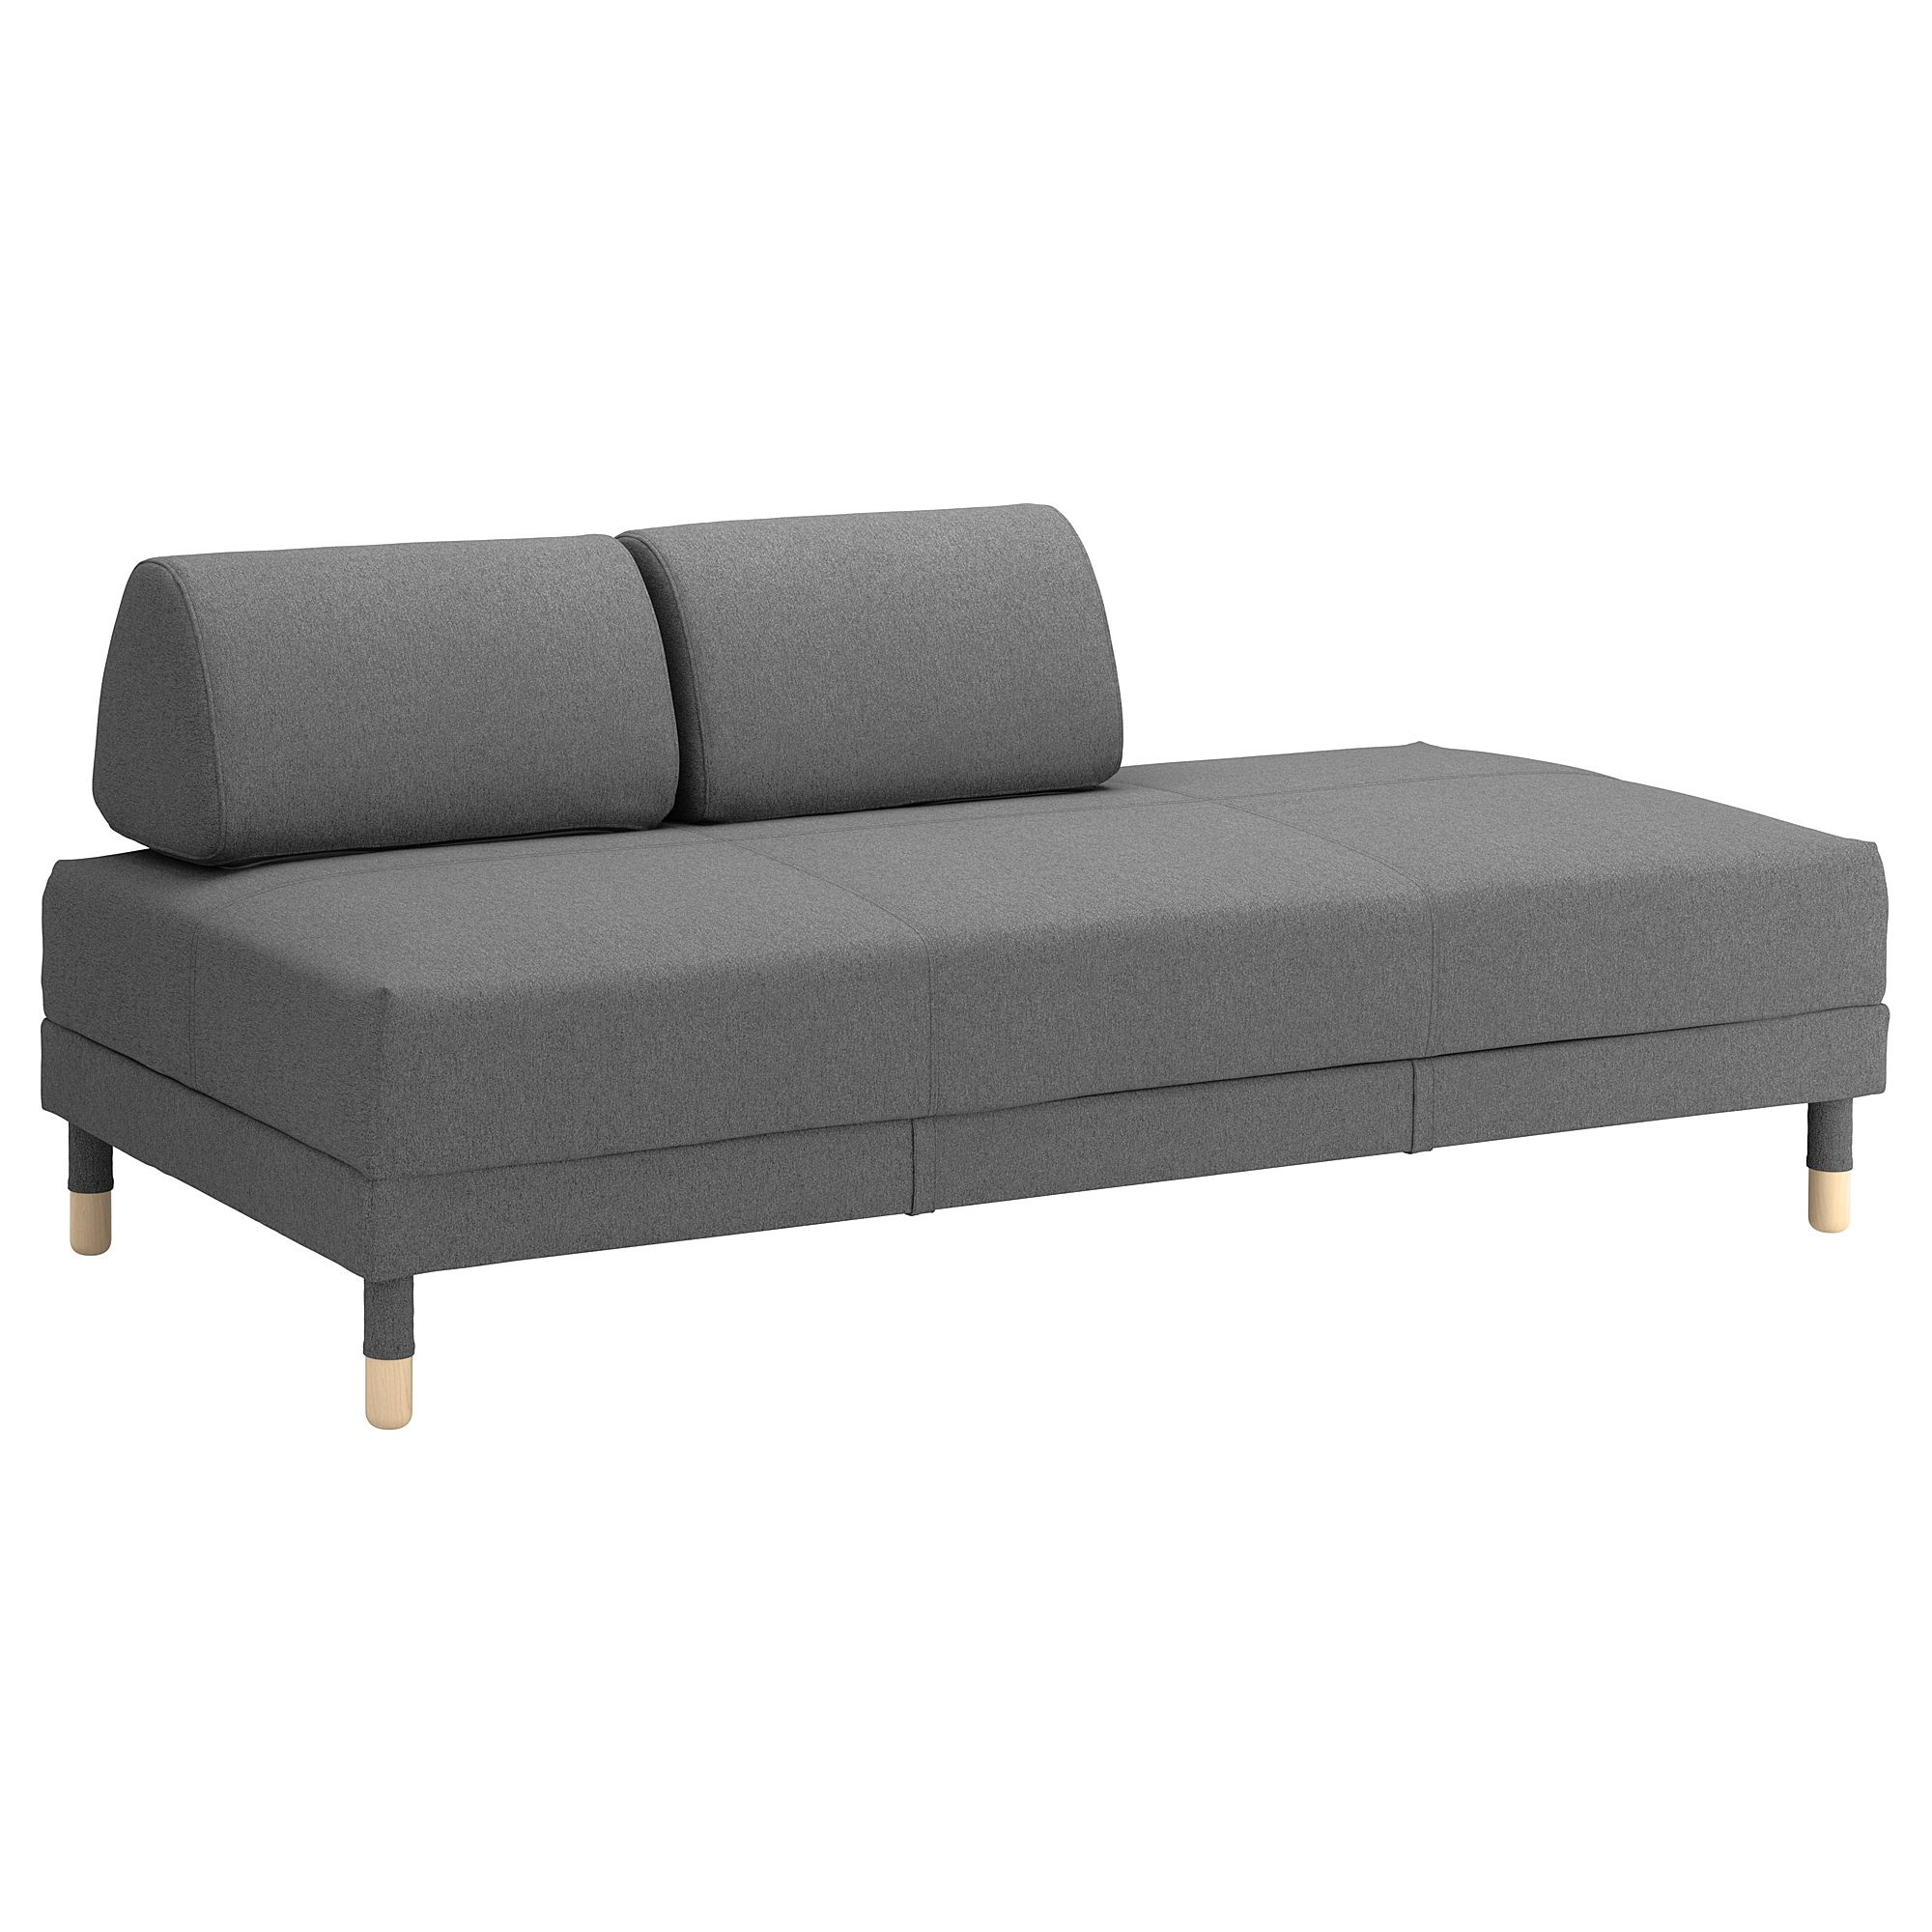 Favorite Flottebo Sofa Bed Lysed Dark Grey 90 Cm – Ikea With Regard To Cheap Single Sofa Bed Chairs (View 4 of 20)